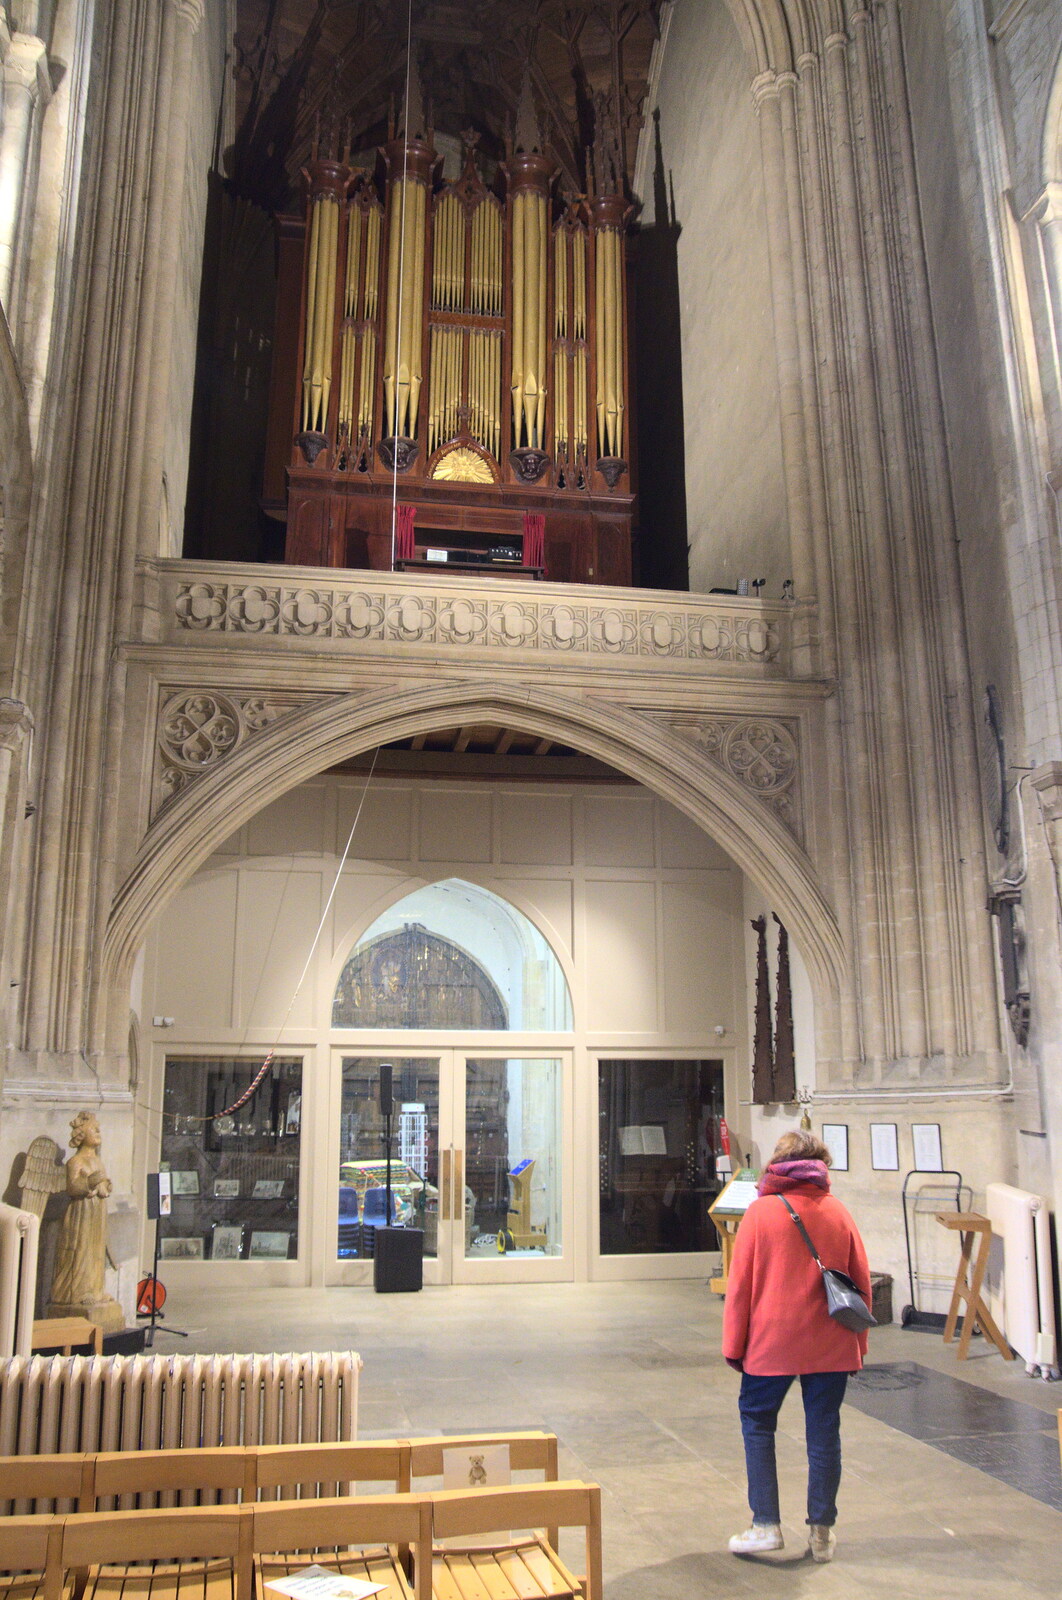 Isobel looks at one of the two organs from A Postcard from Wymondham, Norfolk - 26th January 2023